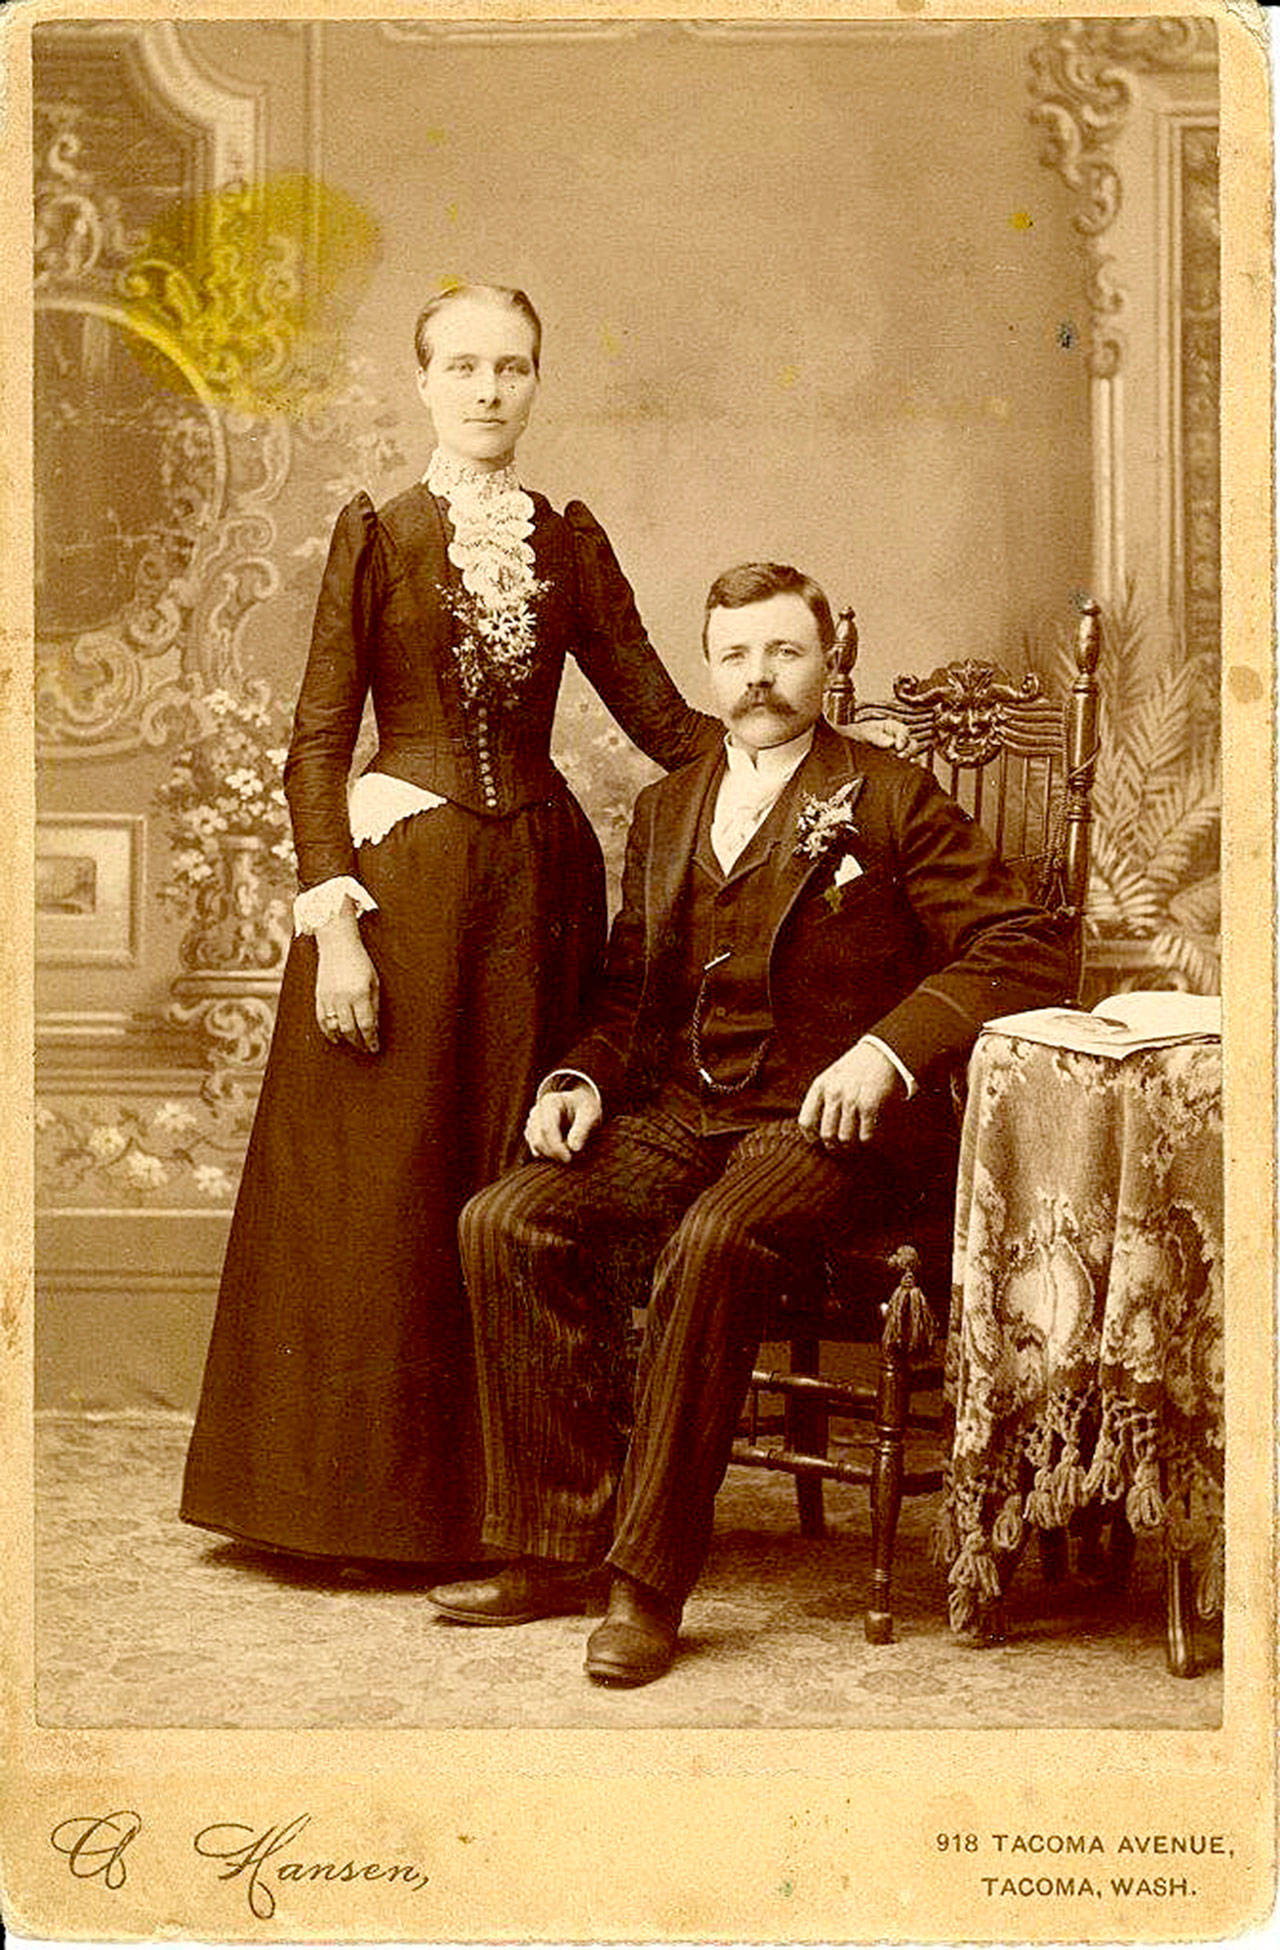 Peter and Anna Olson’s wedding photo in 1892. (Jefferson County Historical Society)